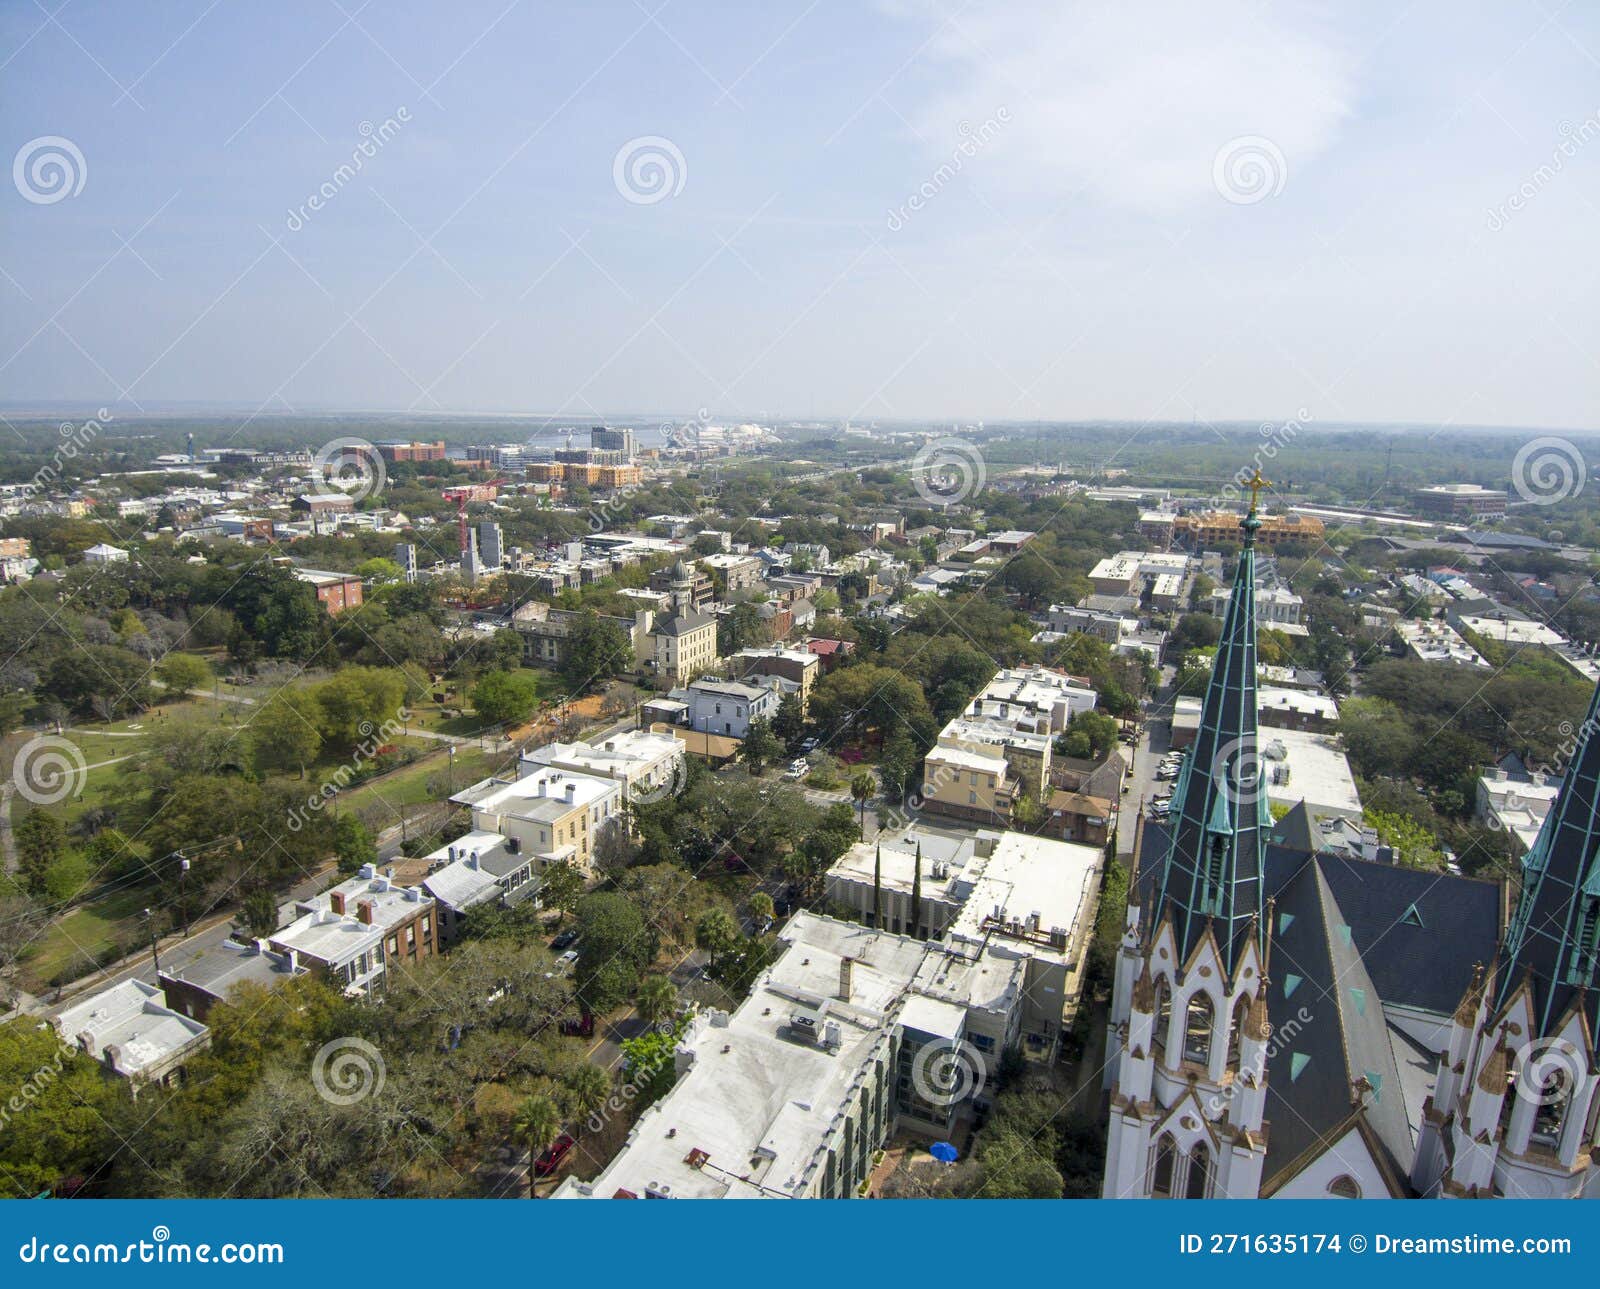 erial shot of the office buildings, apartments and shops in the city skyline surrounded by a river, lush green trees, roads and